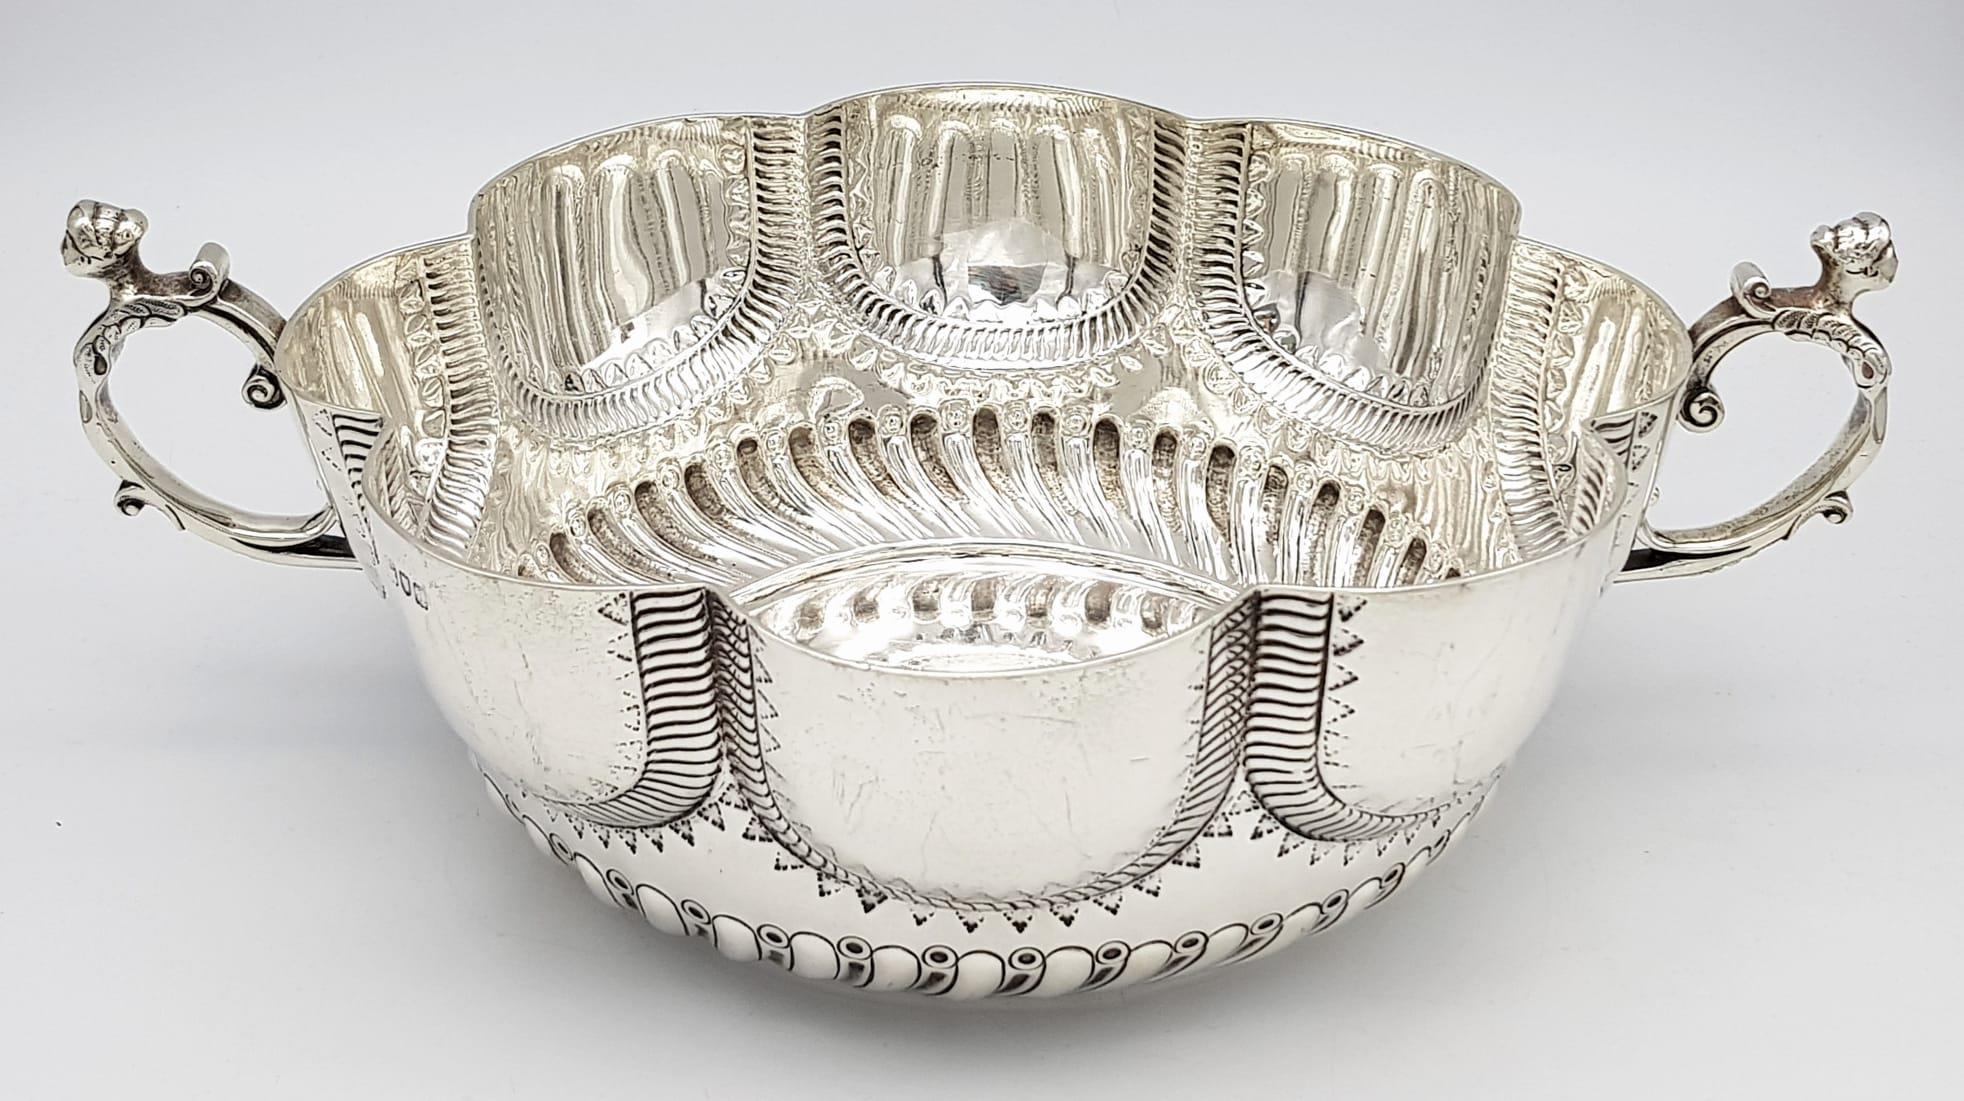 A BEAUTIFULLY ORNATE HAND ENGRAVED SOLID SILVER PUNCH BOWL MADE BY LAMBERT OF COVENTRY STREET ,